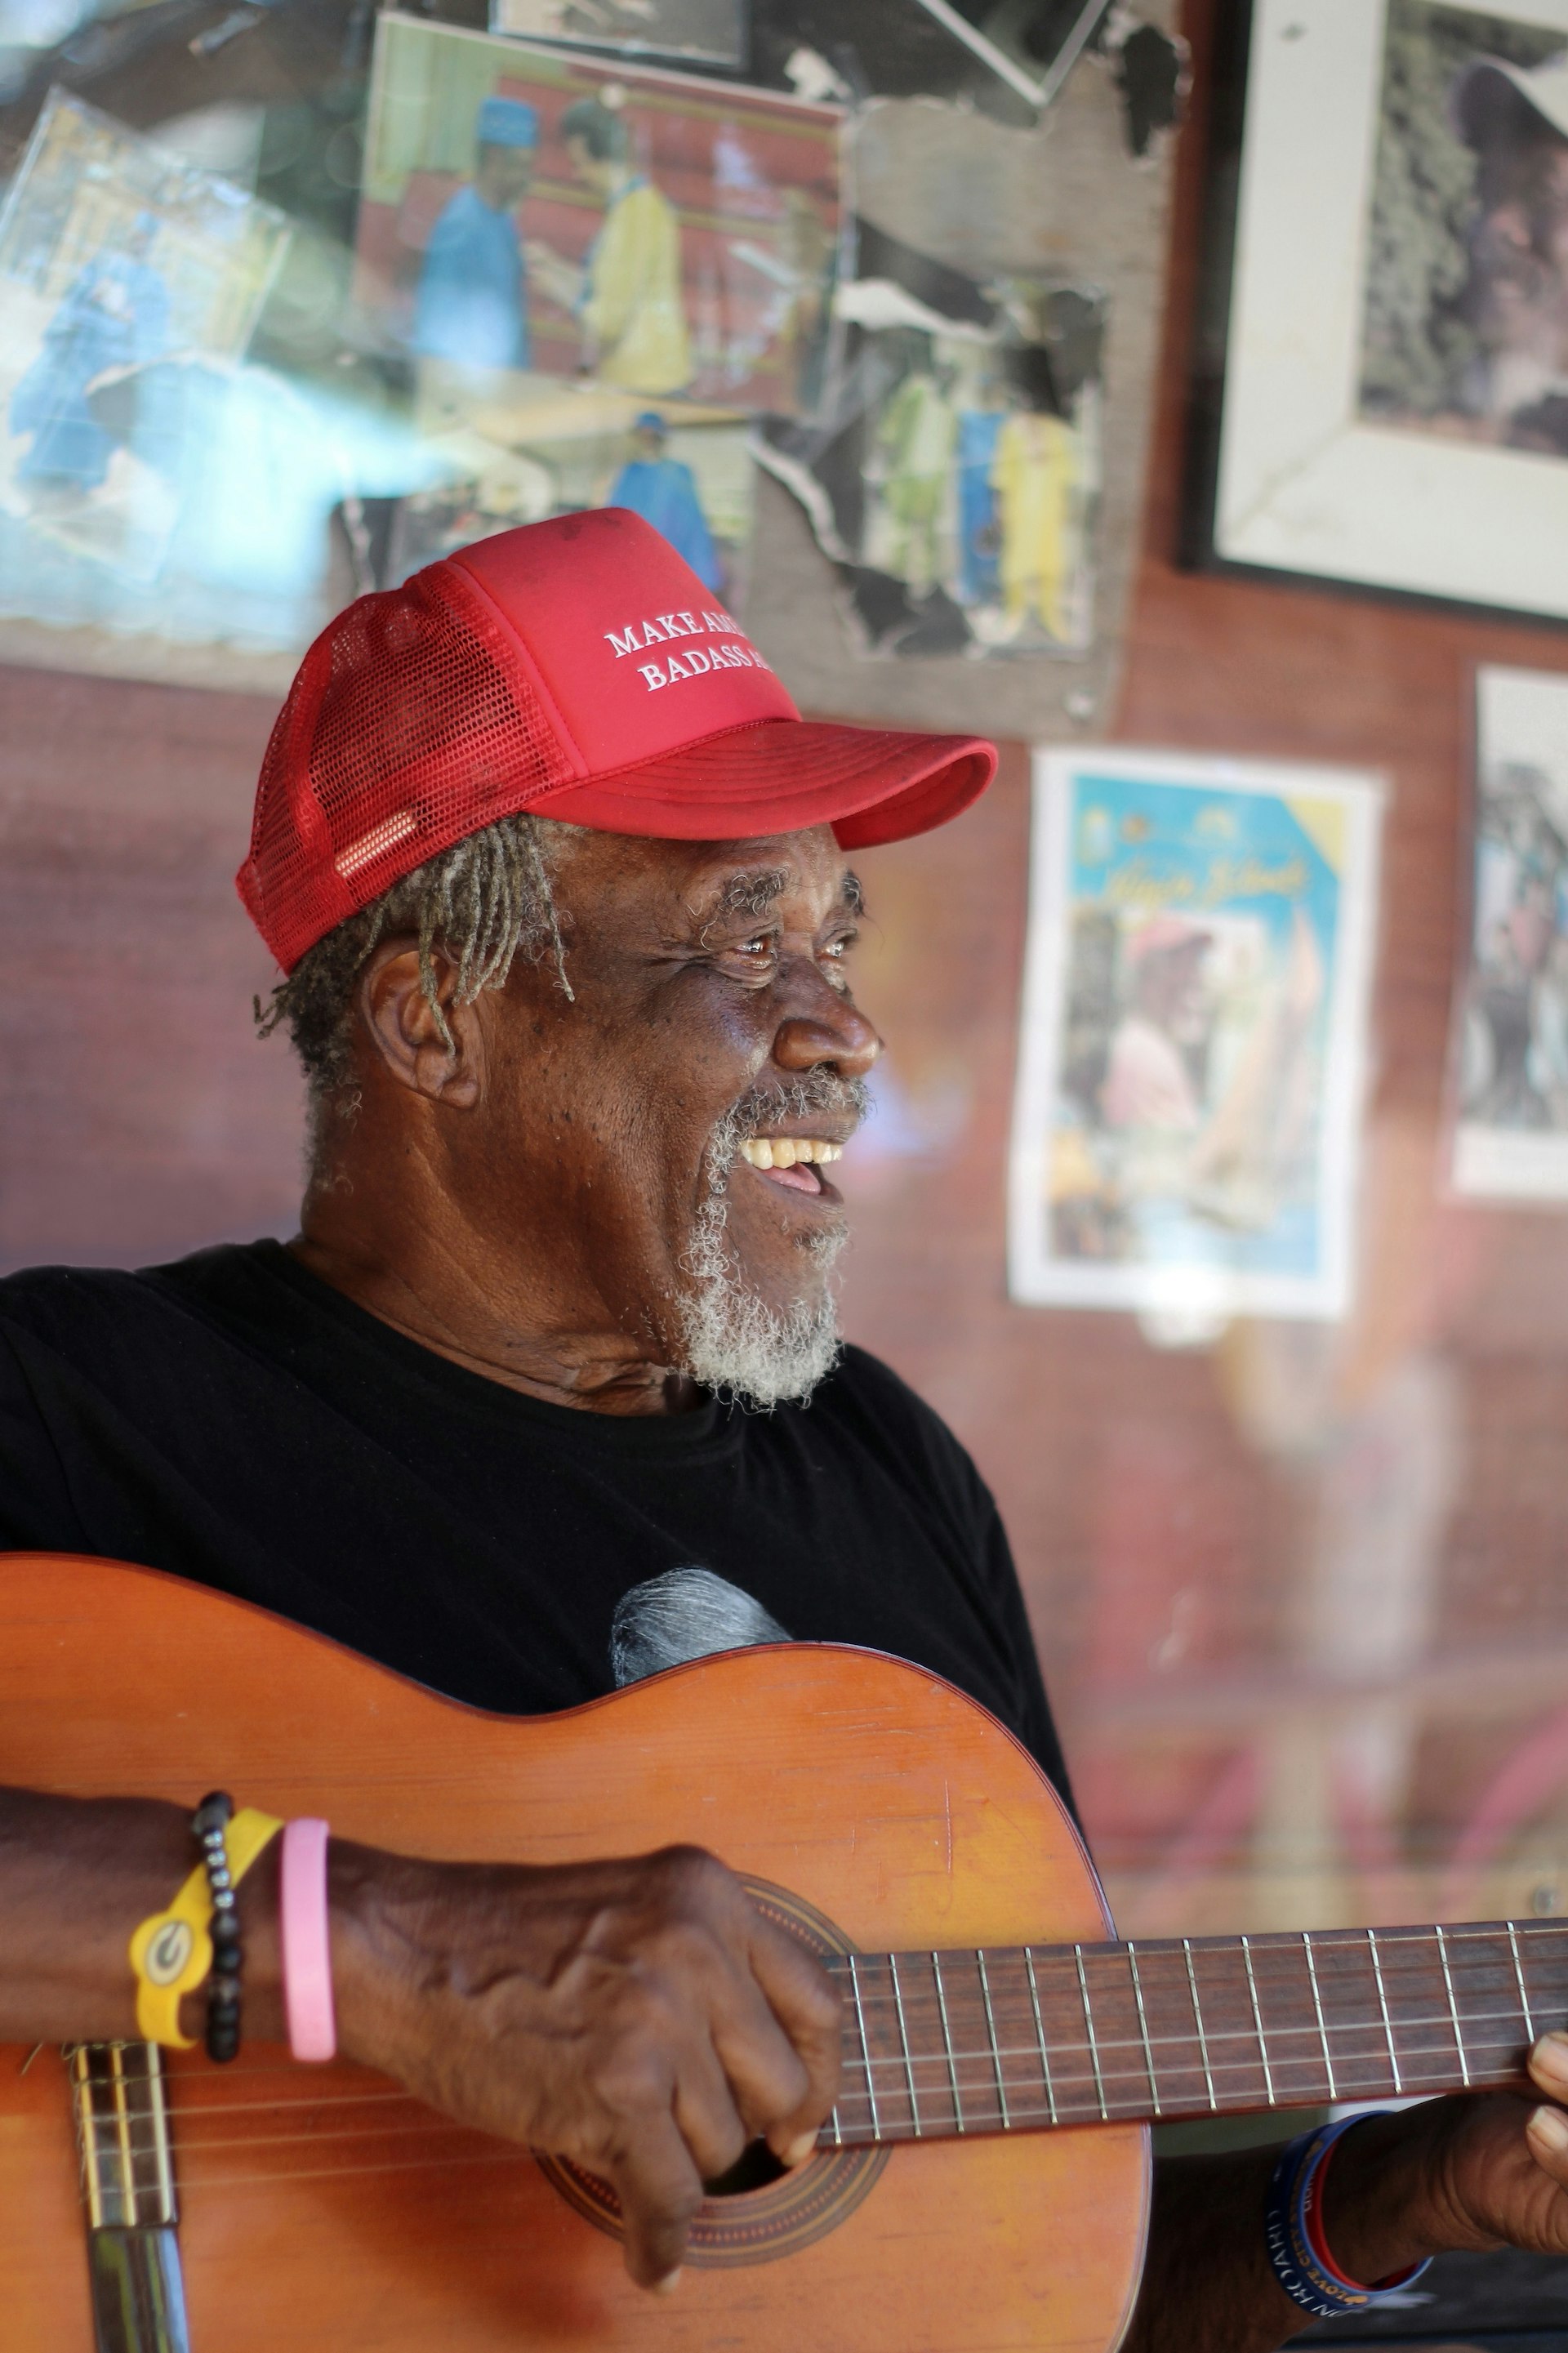 A man, wearing a red cap, strums on a guitar and sings